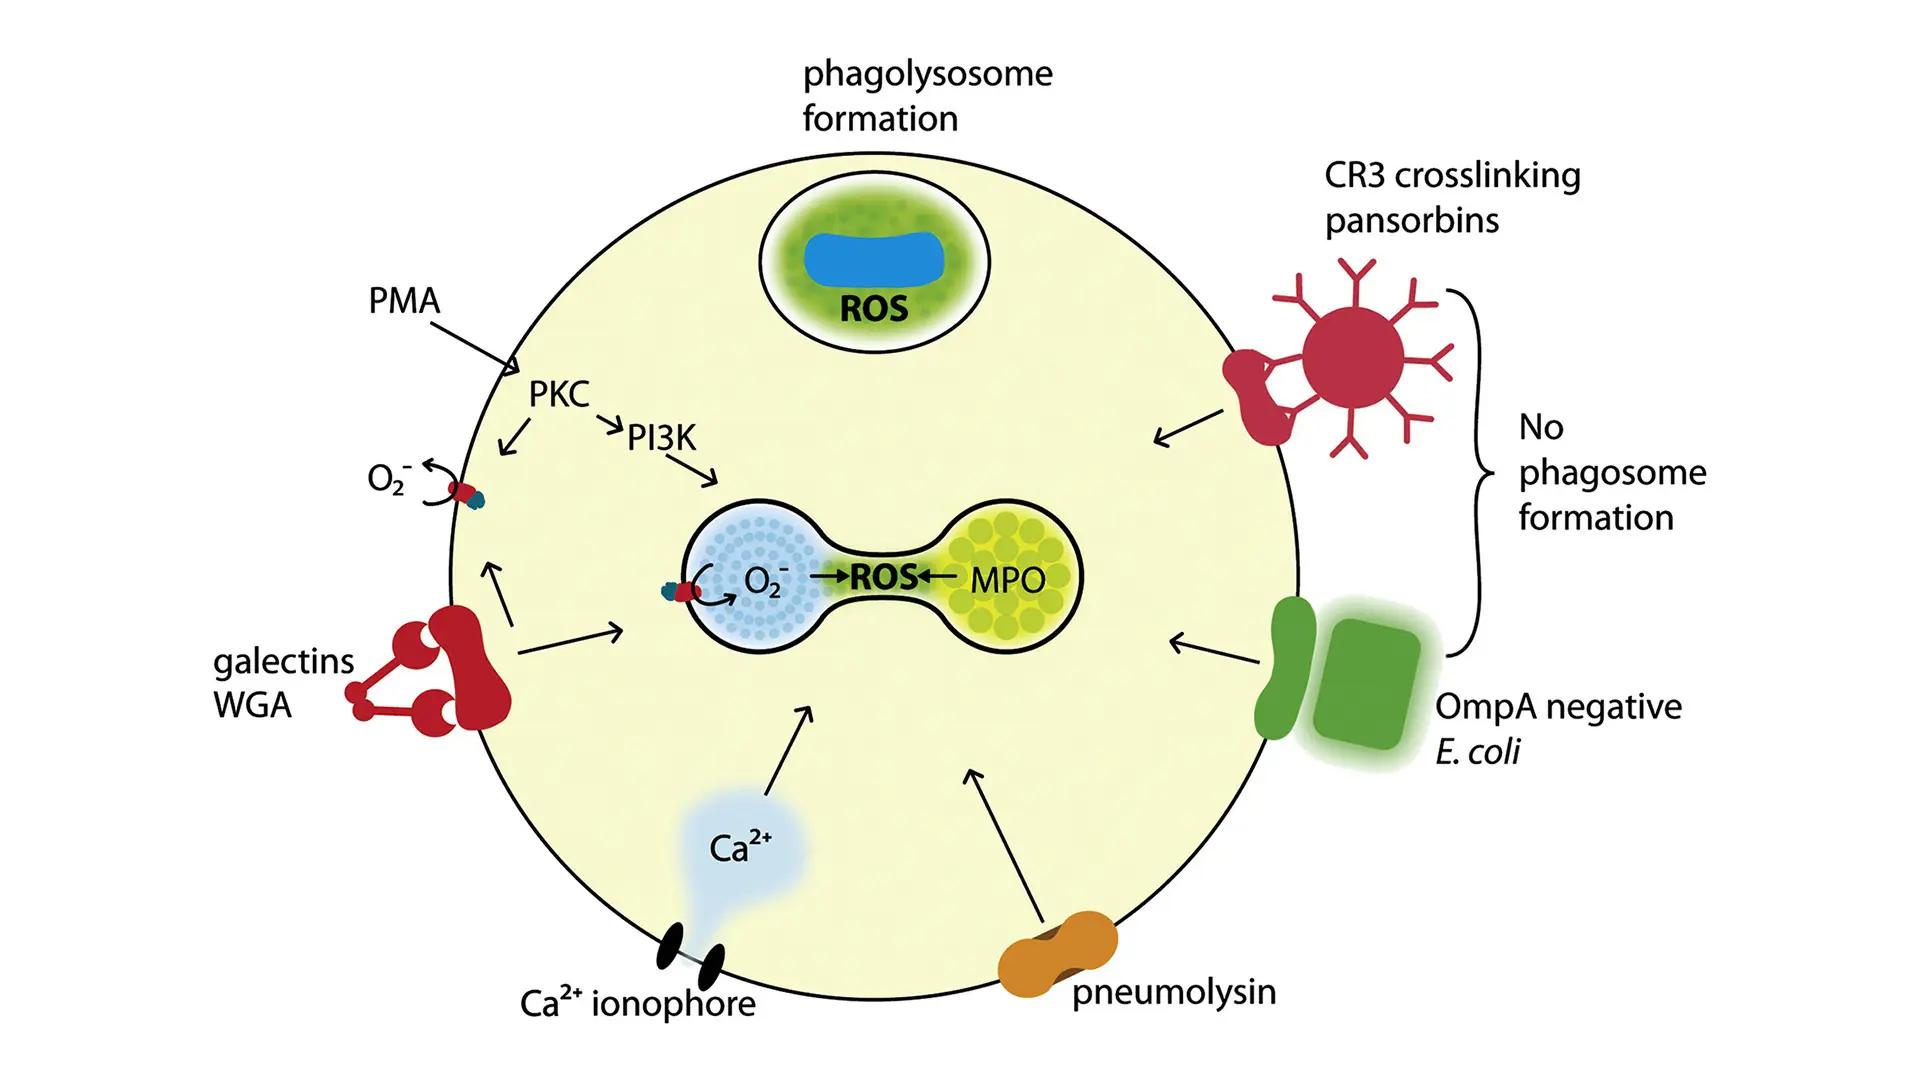 An illustration of neutrophils different interactions during an inflammatory process